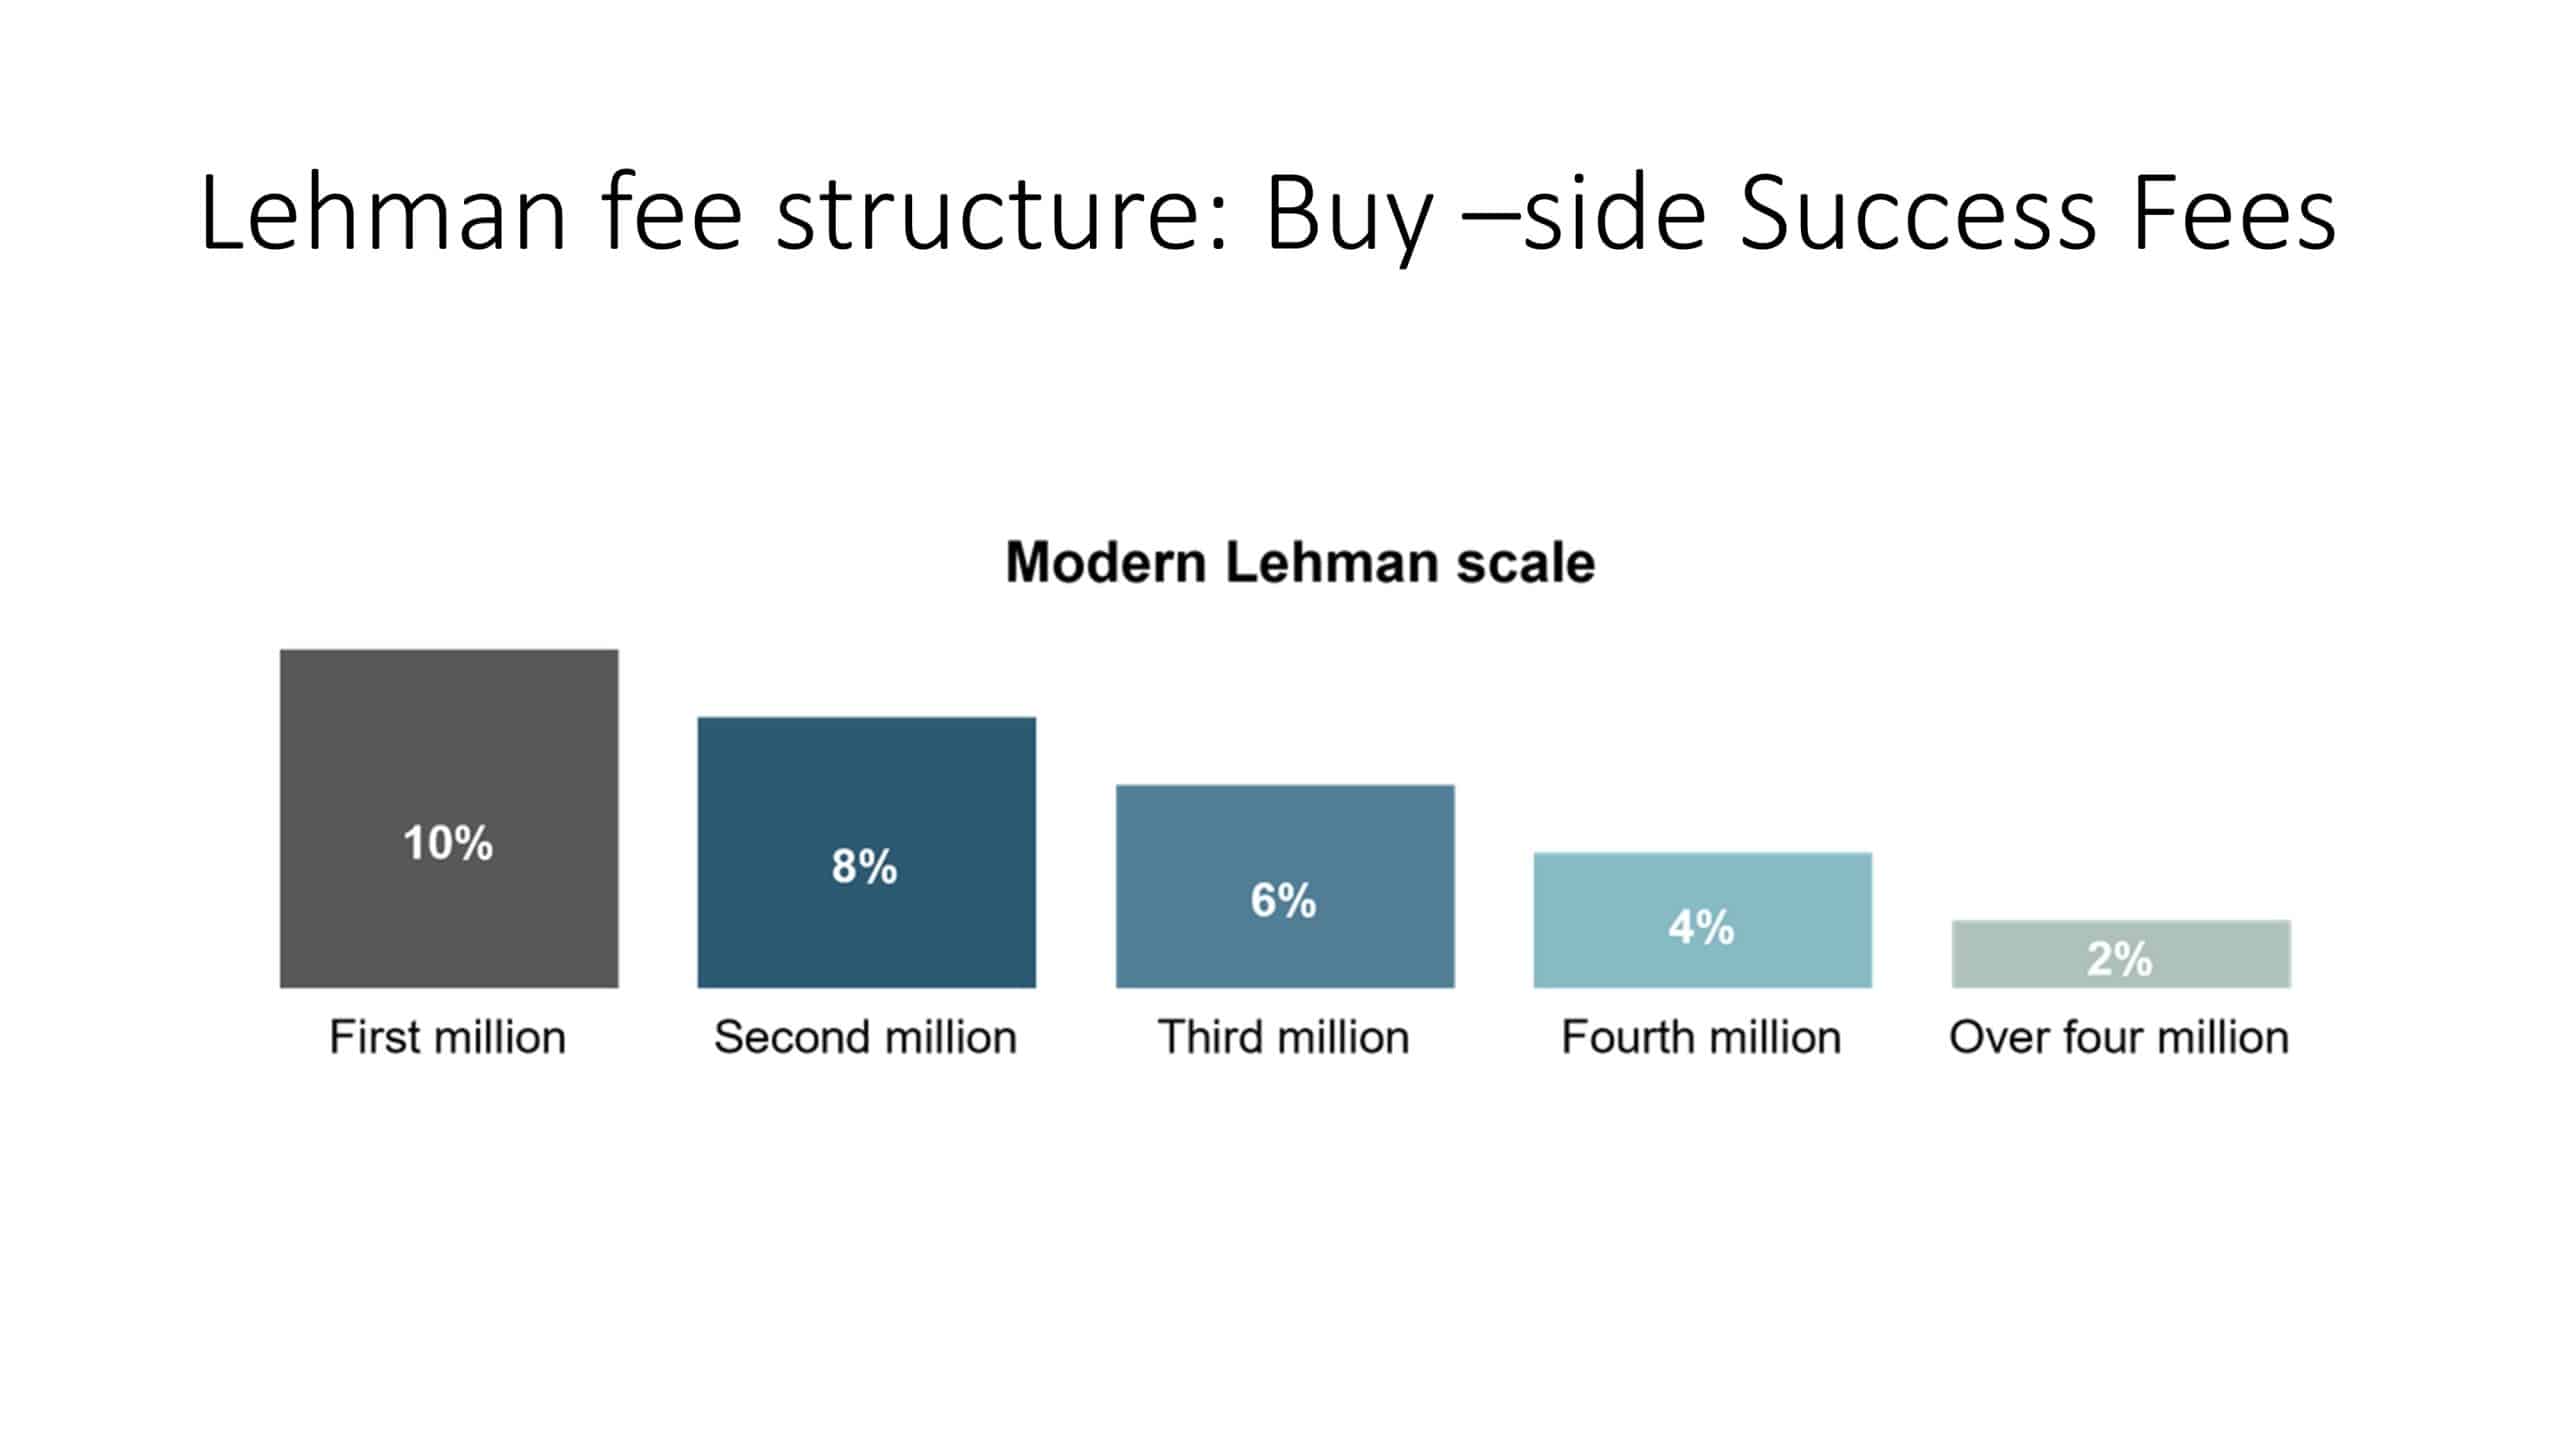 Lehman fee structure for buy-side success fee